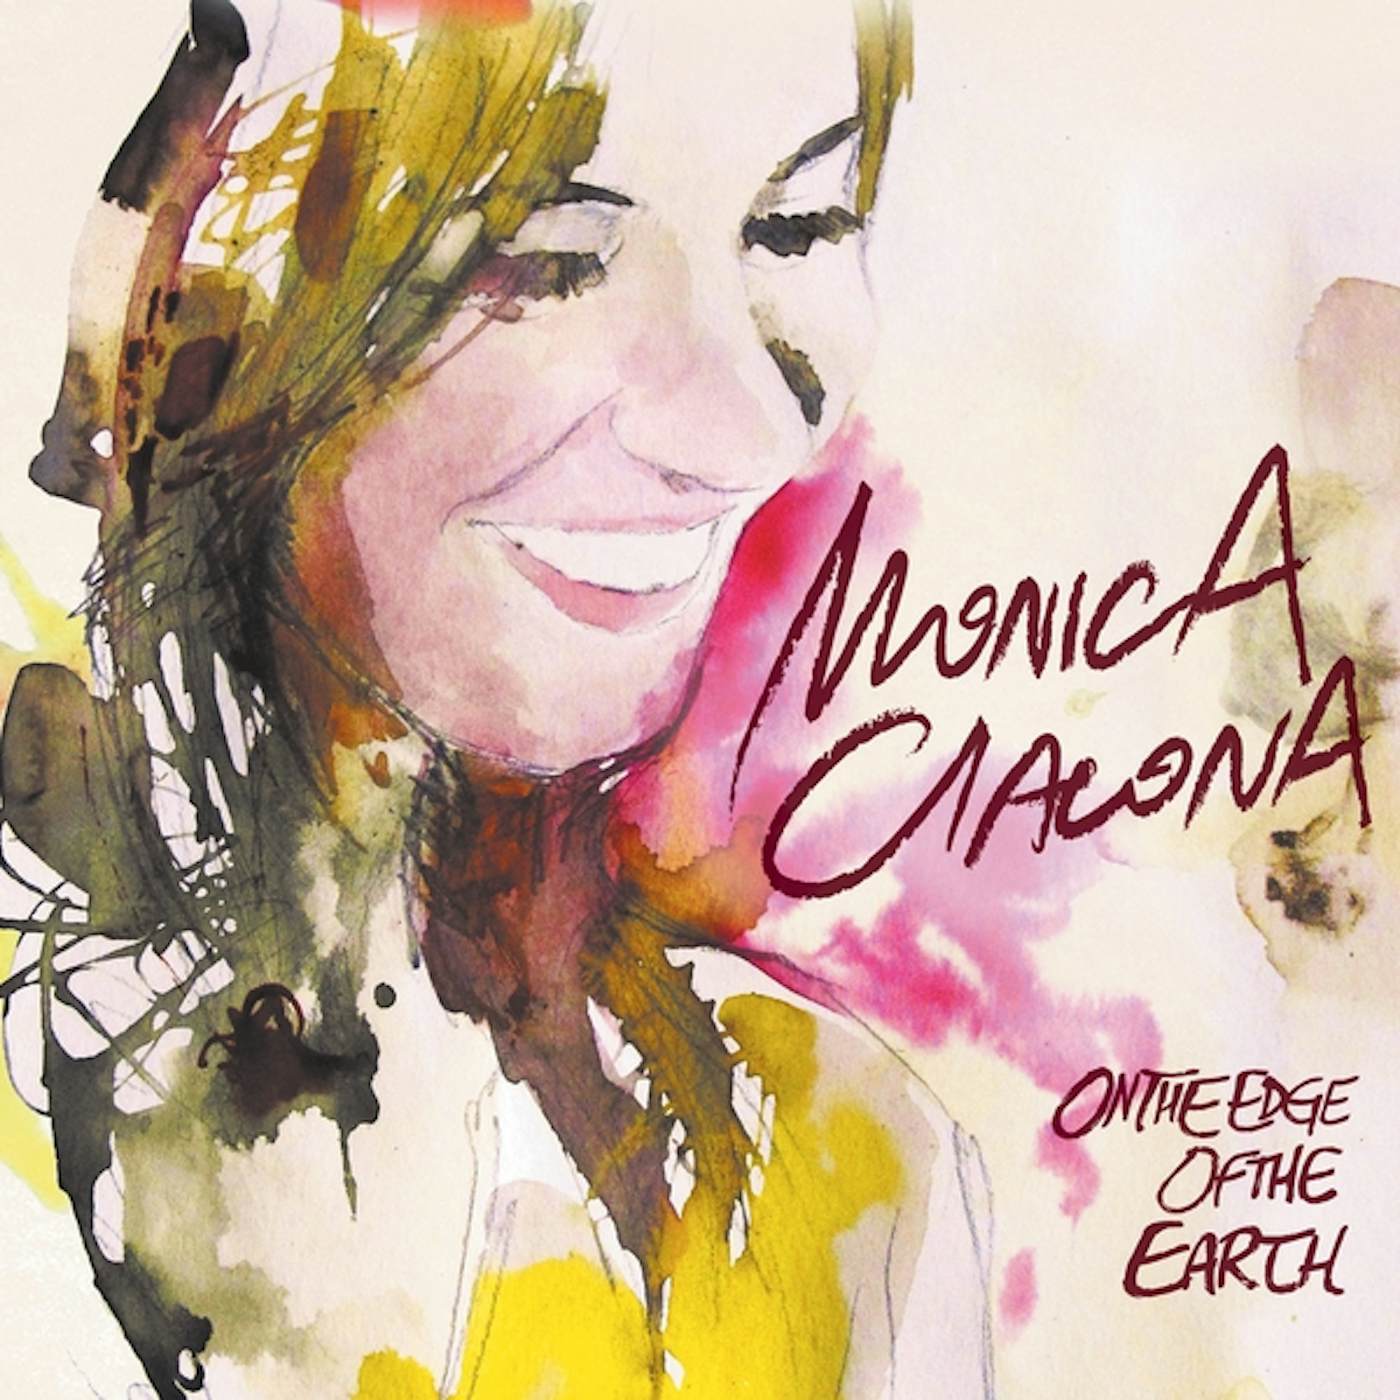 Monica ON THE EDGE OF THE EARTH CD